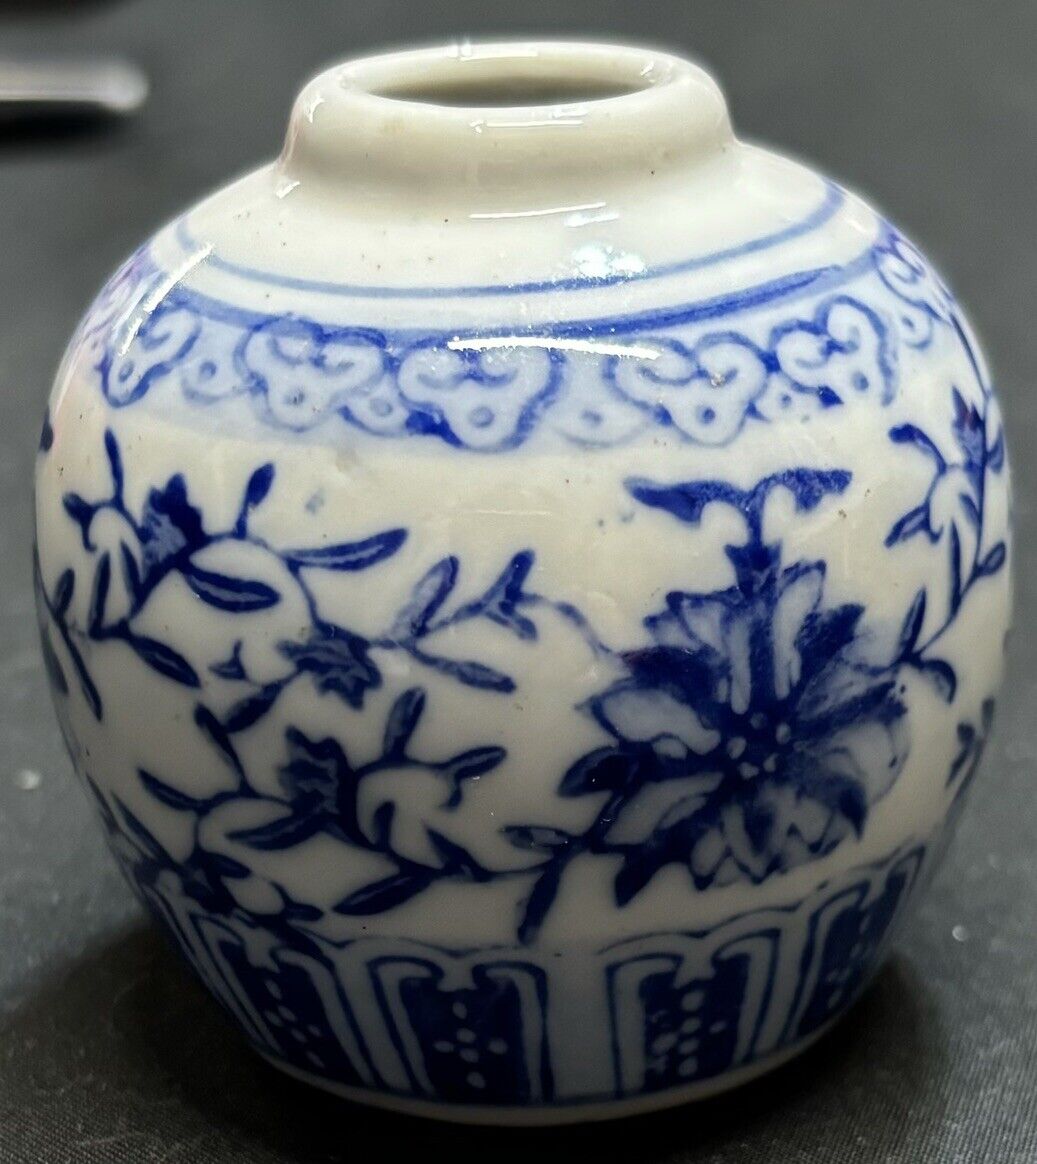 Vintage Chinese Porcelain Cobalt Blue & White small Ginger Jar China Approx 2.25